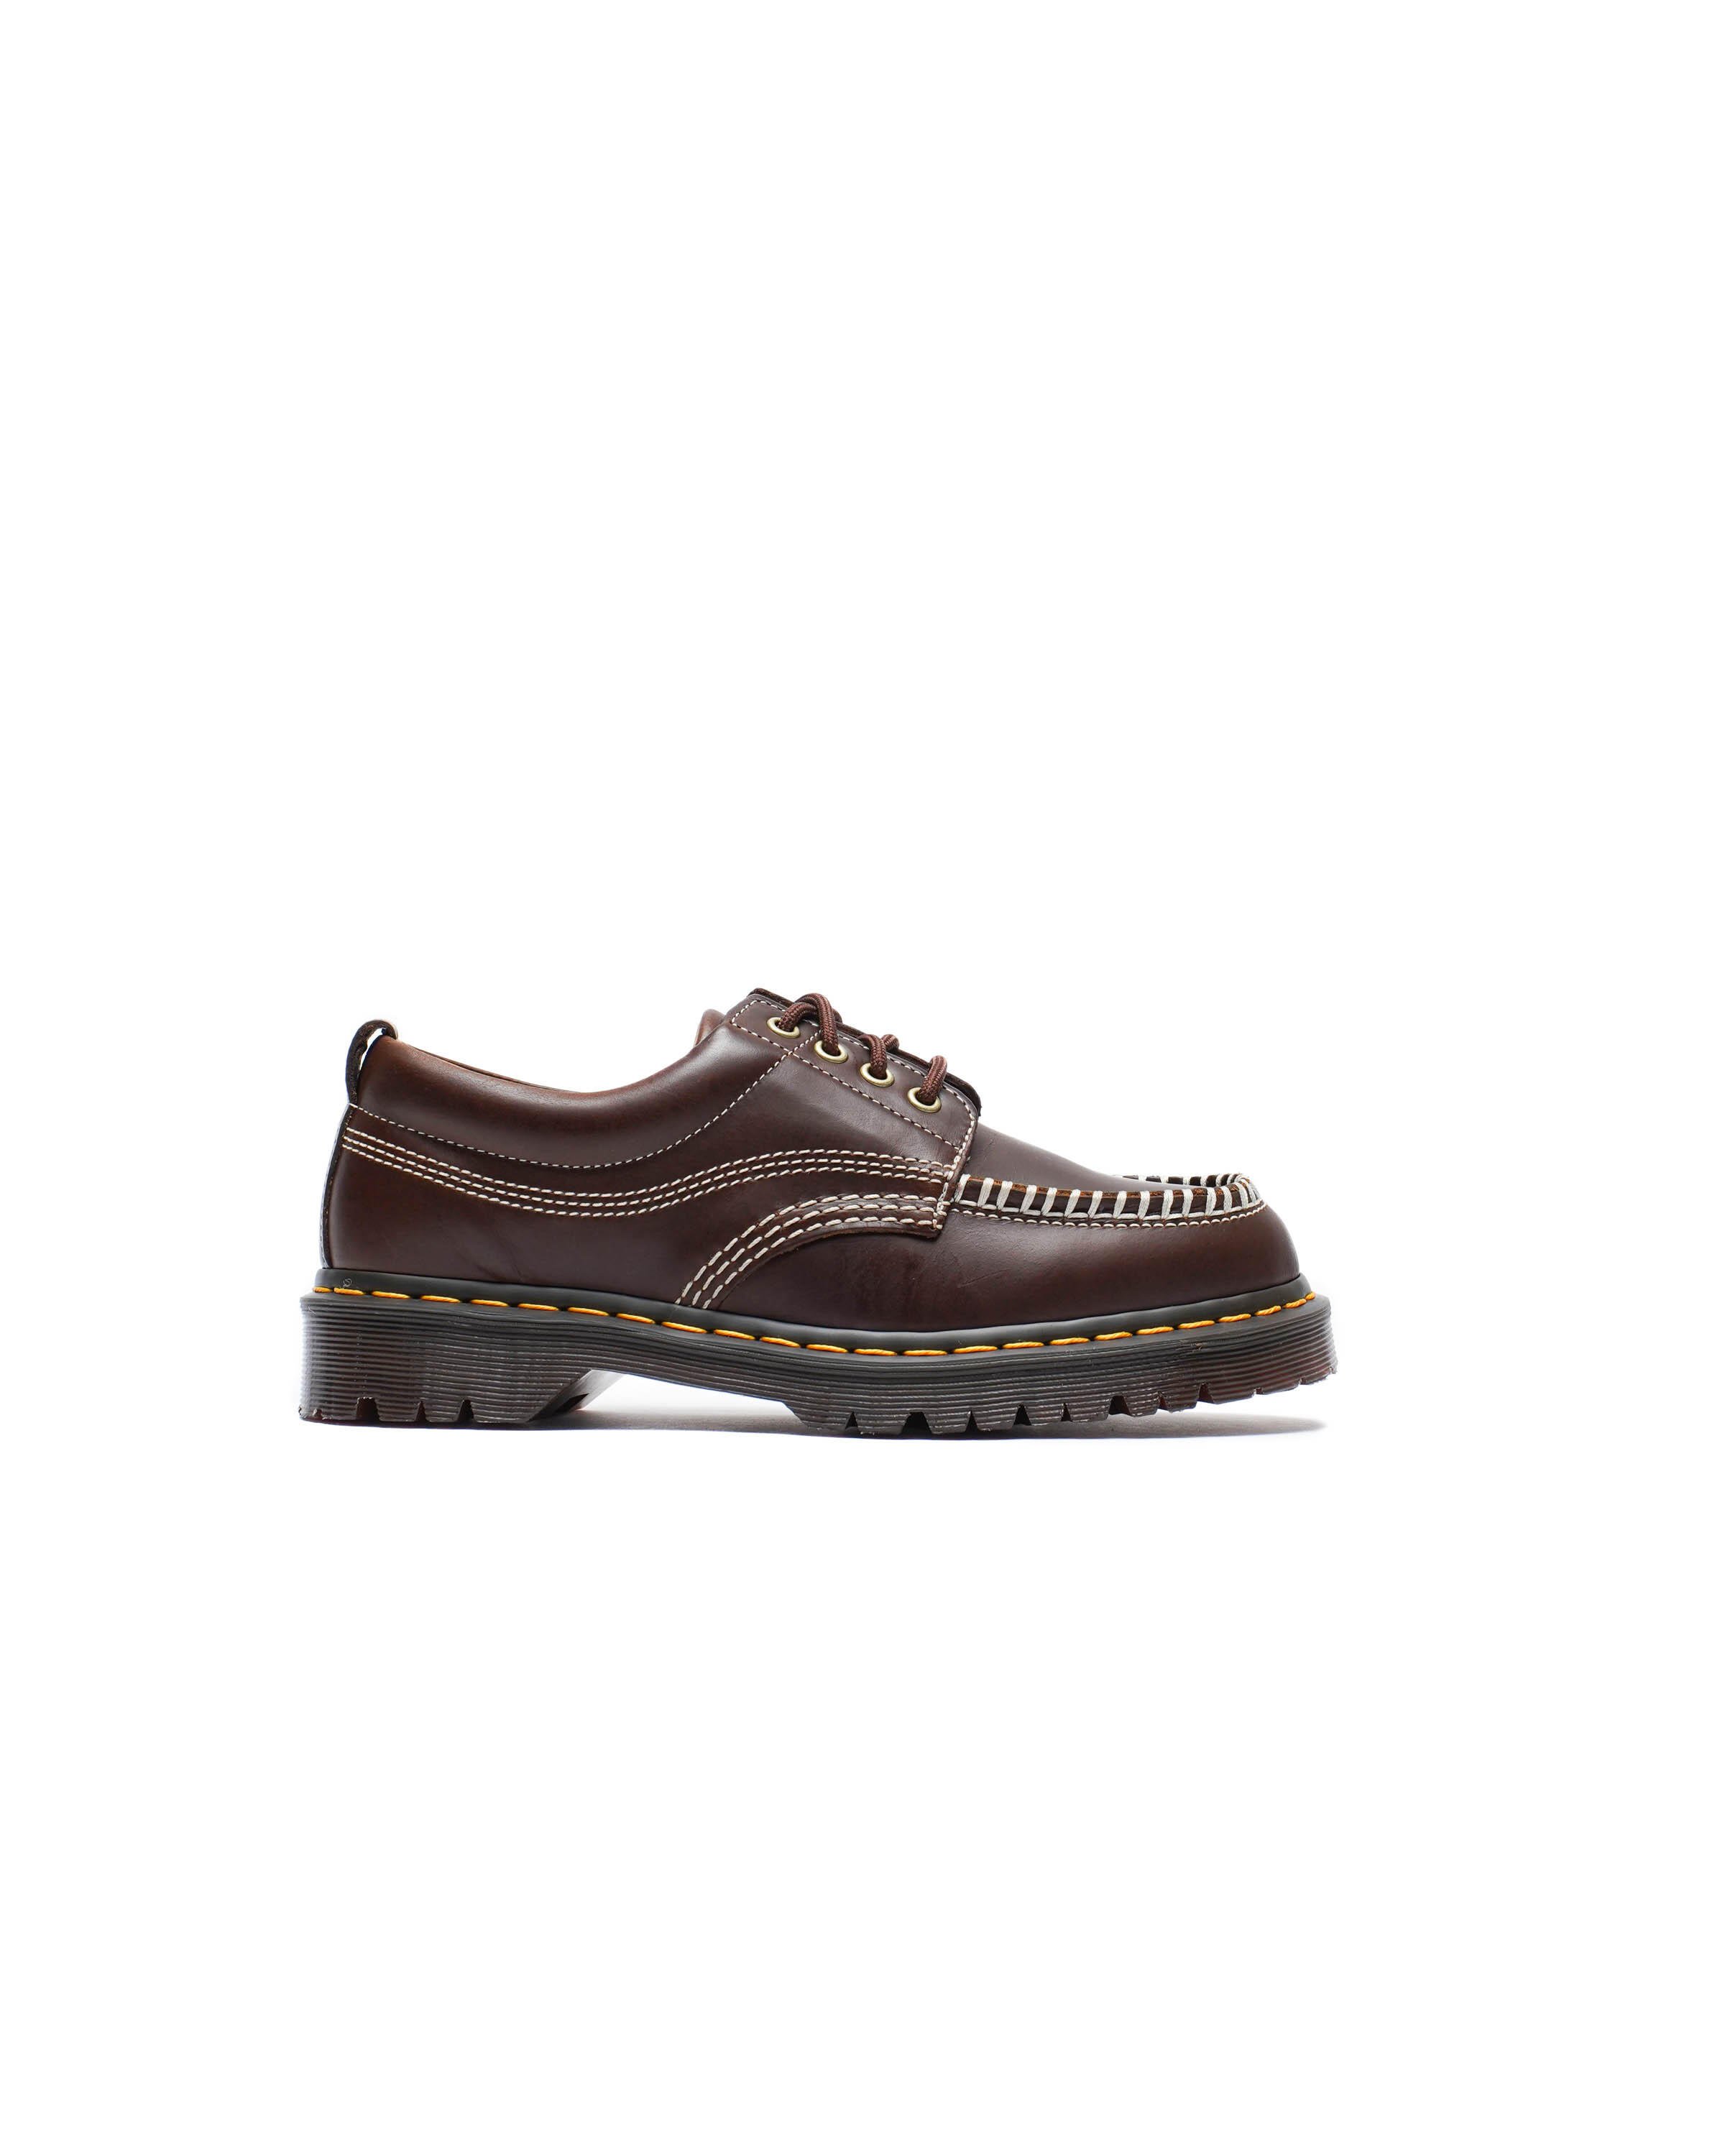 Dr. Martens Lowell